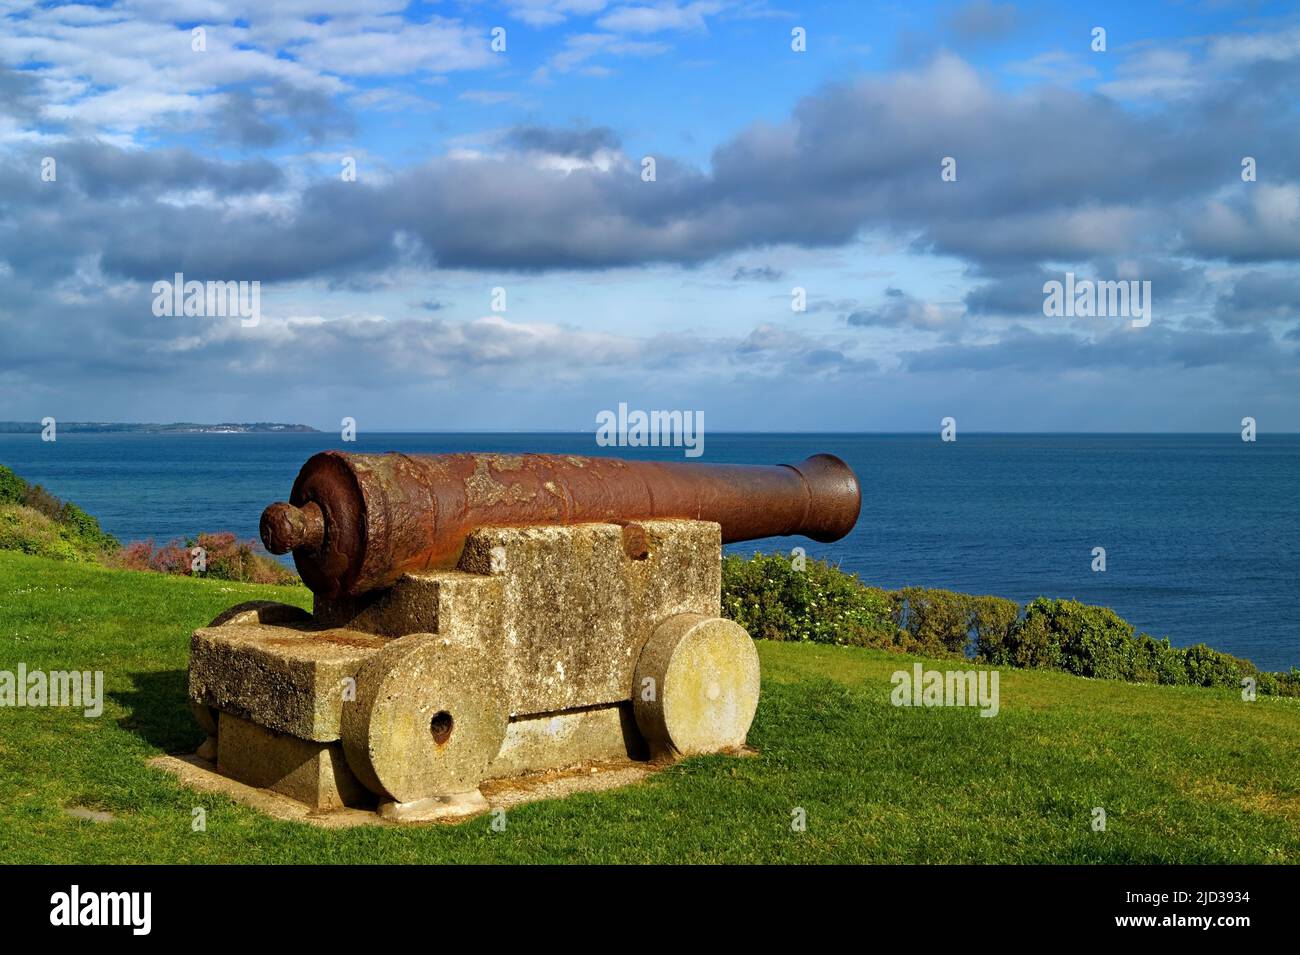 UK, Kent, Tankerton Slopes, Cannon pointing out to Sea Stock Photo